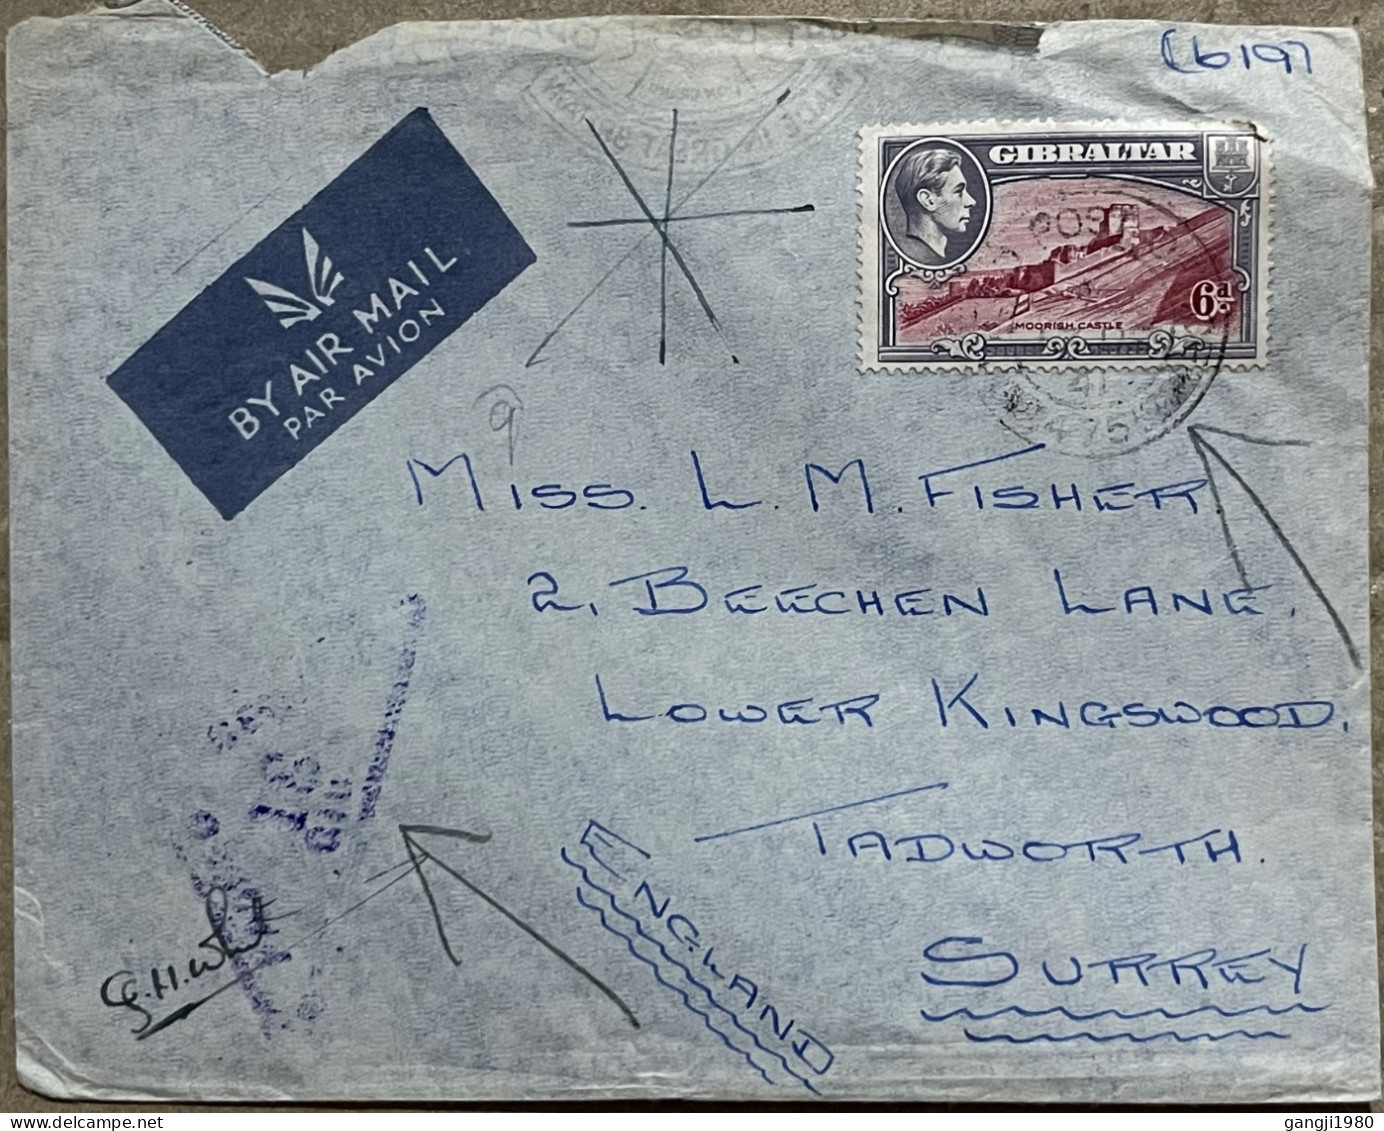 GIBRALTAR 1941, WORLD WAR-2, COVER USED TO ENGLAND, TRIANGLE CENSOR, FPO NO 475, MOORISH CASTLE & KING STAMP - Gibilterra